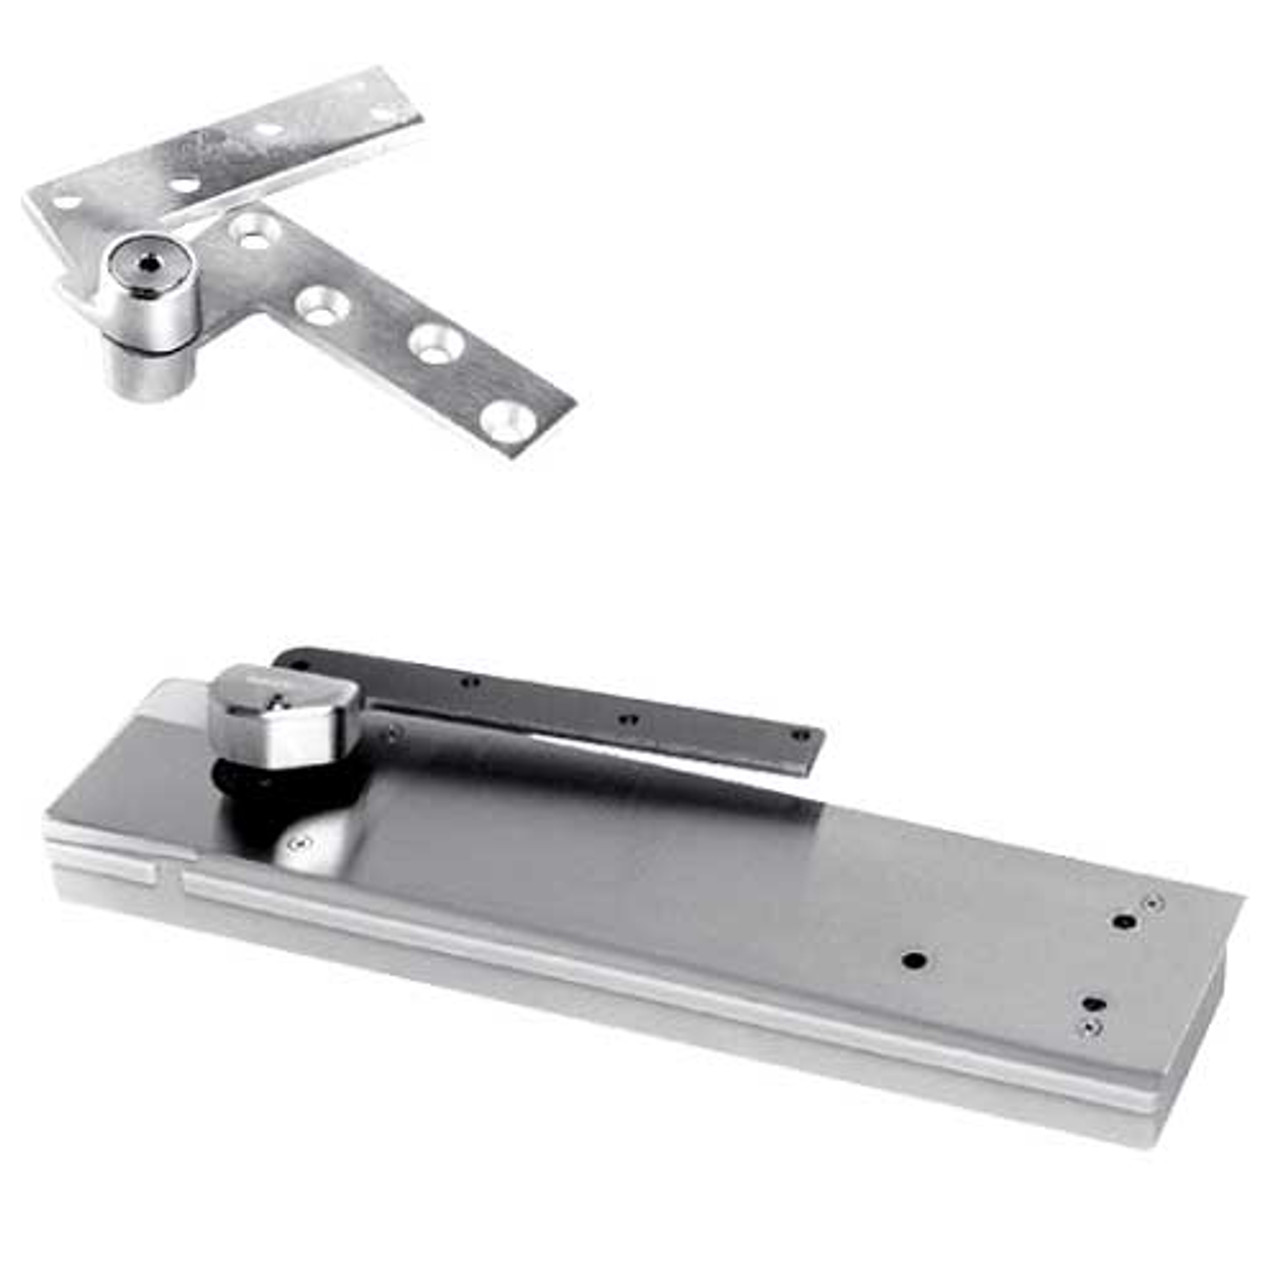 5103ABC180-LFP-LCC-LH-625 Rixson 51 Series 3/4" Offset Hung Shallow Depth Floor Closers in Bright Chrome Finish